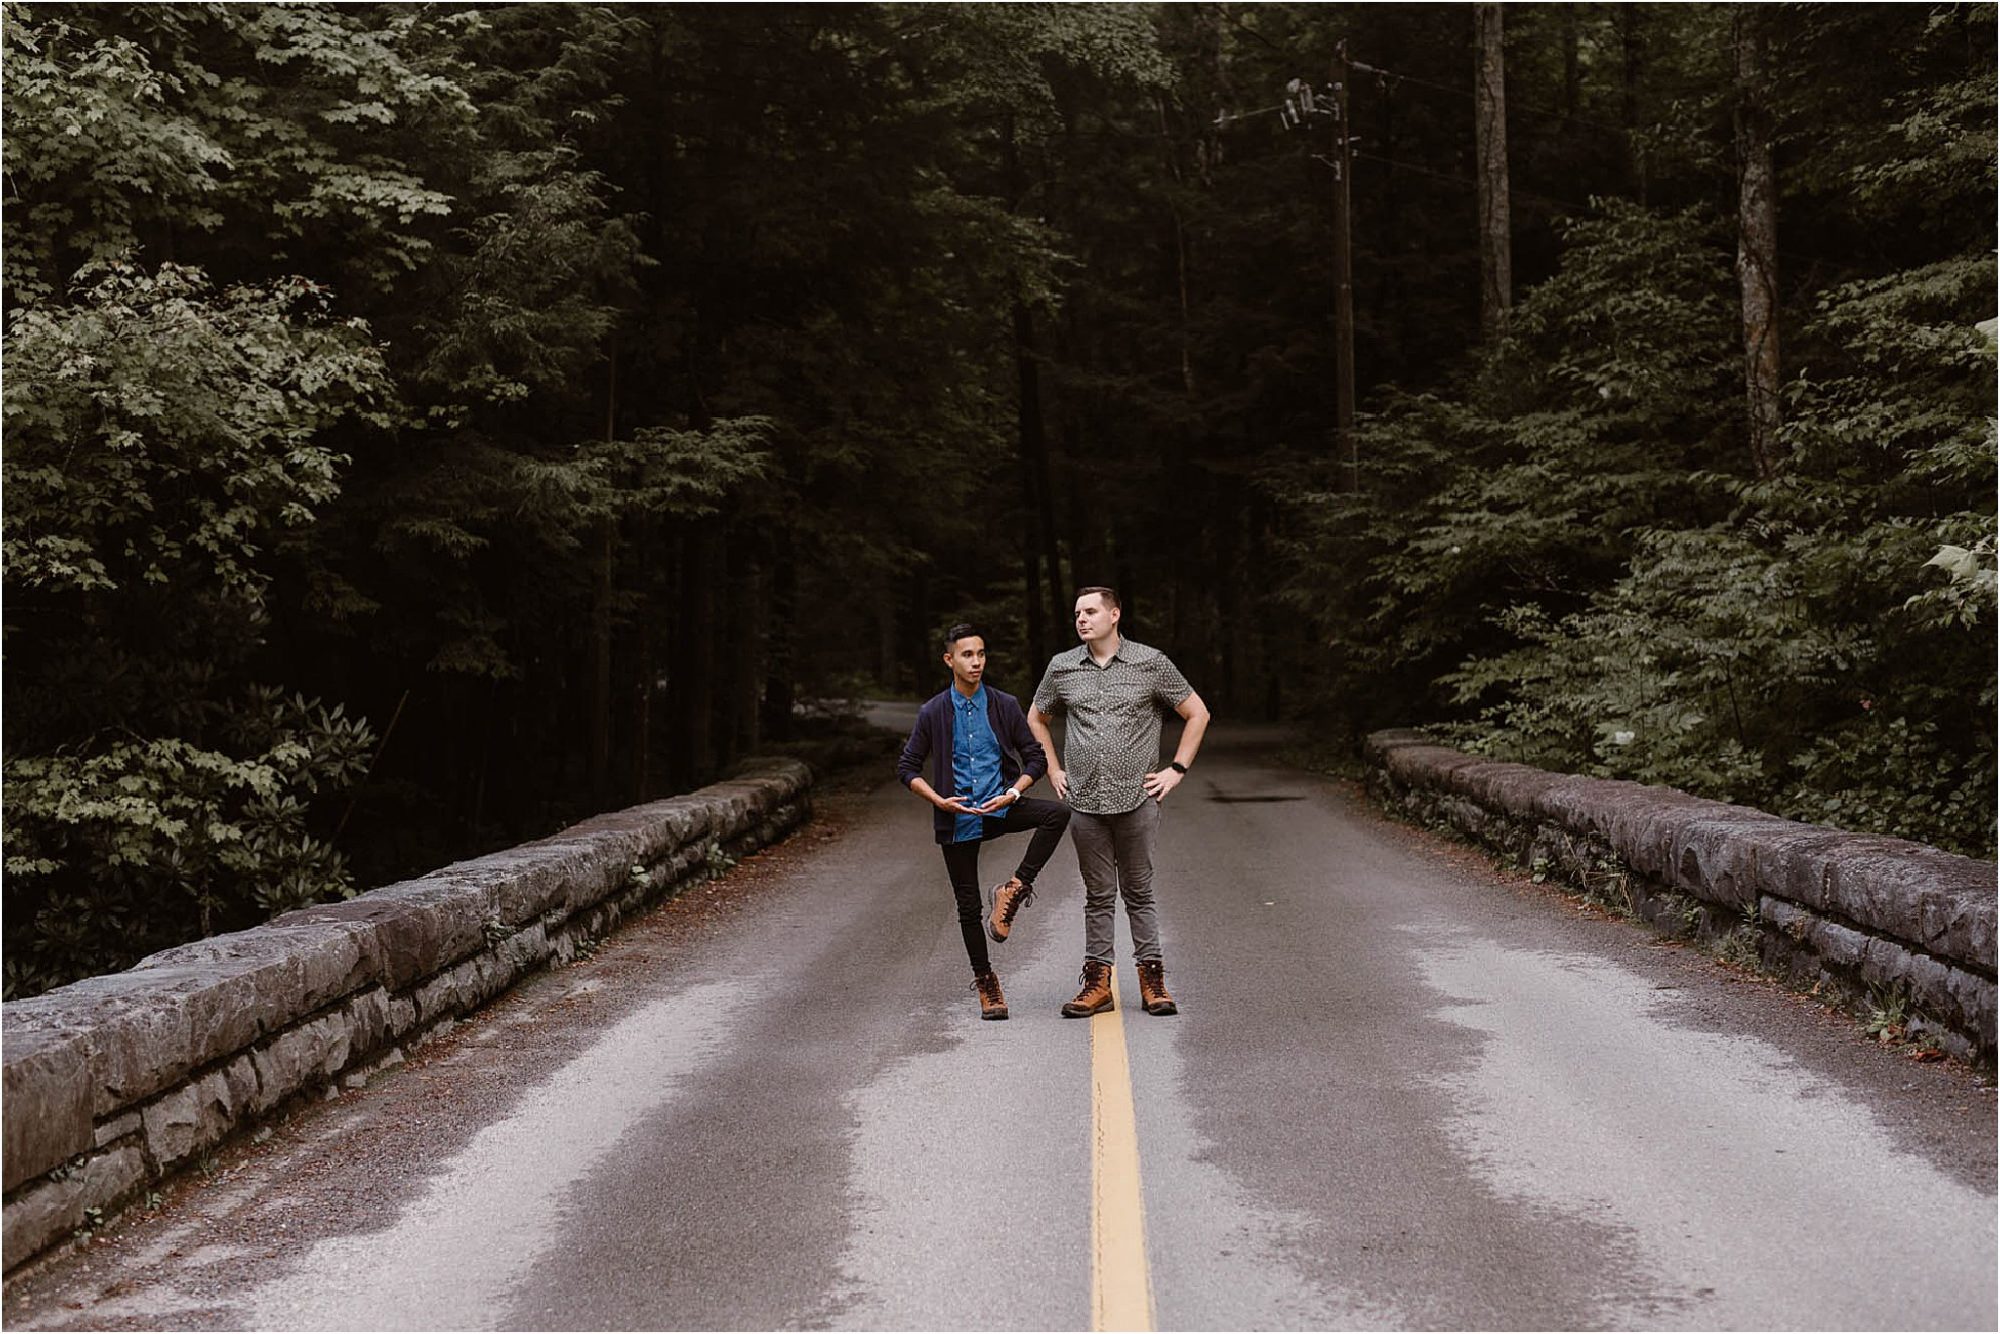 Elkmont couples photos in The Great Smoky Mountains National Park